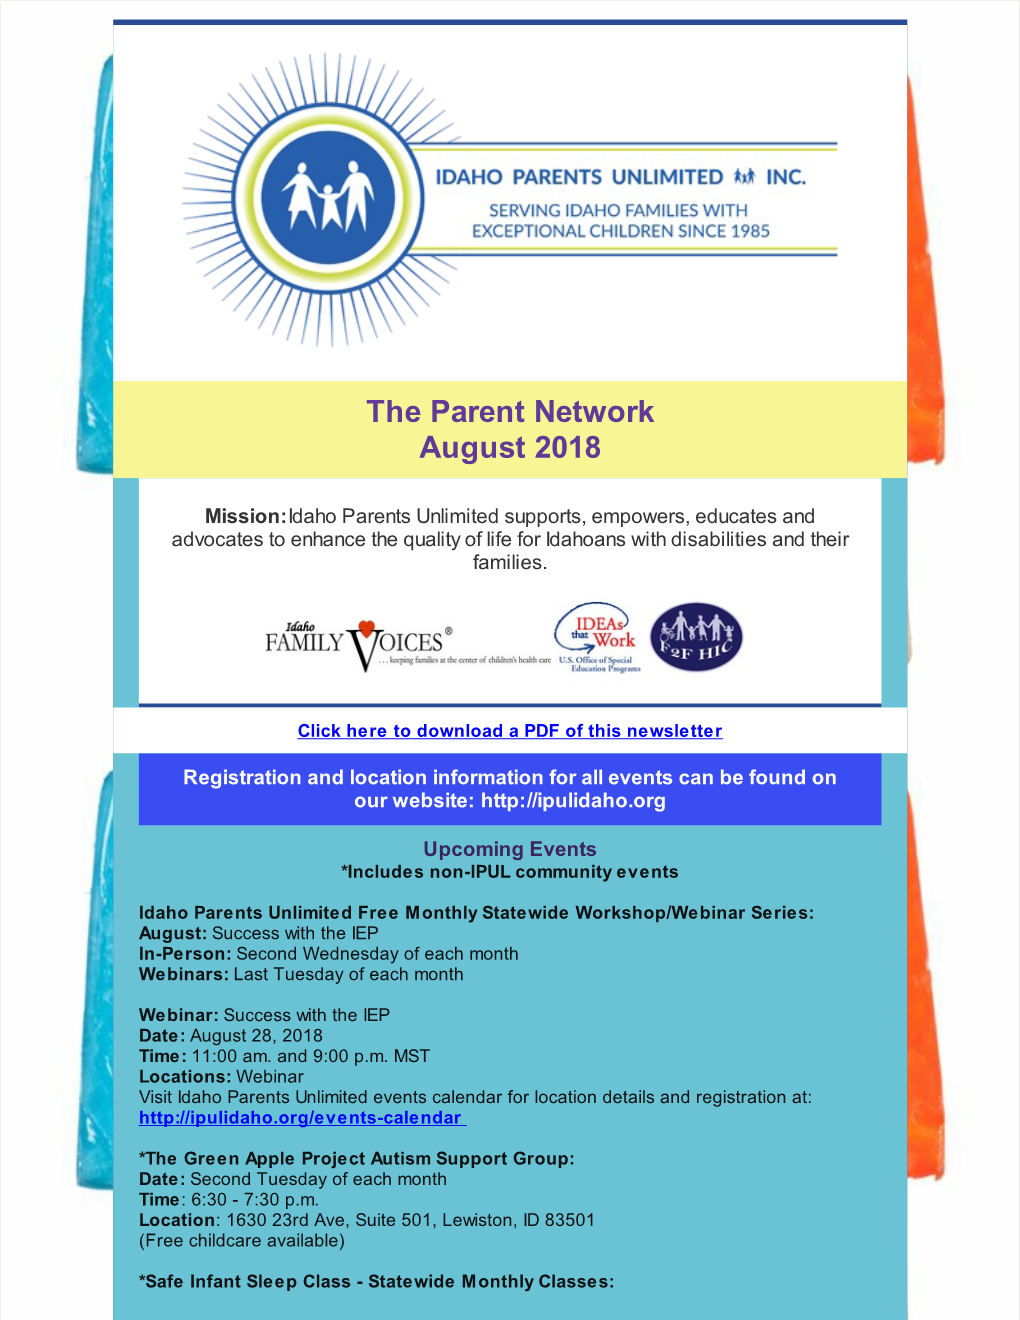 The Parent Network August 2018